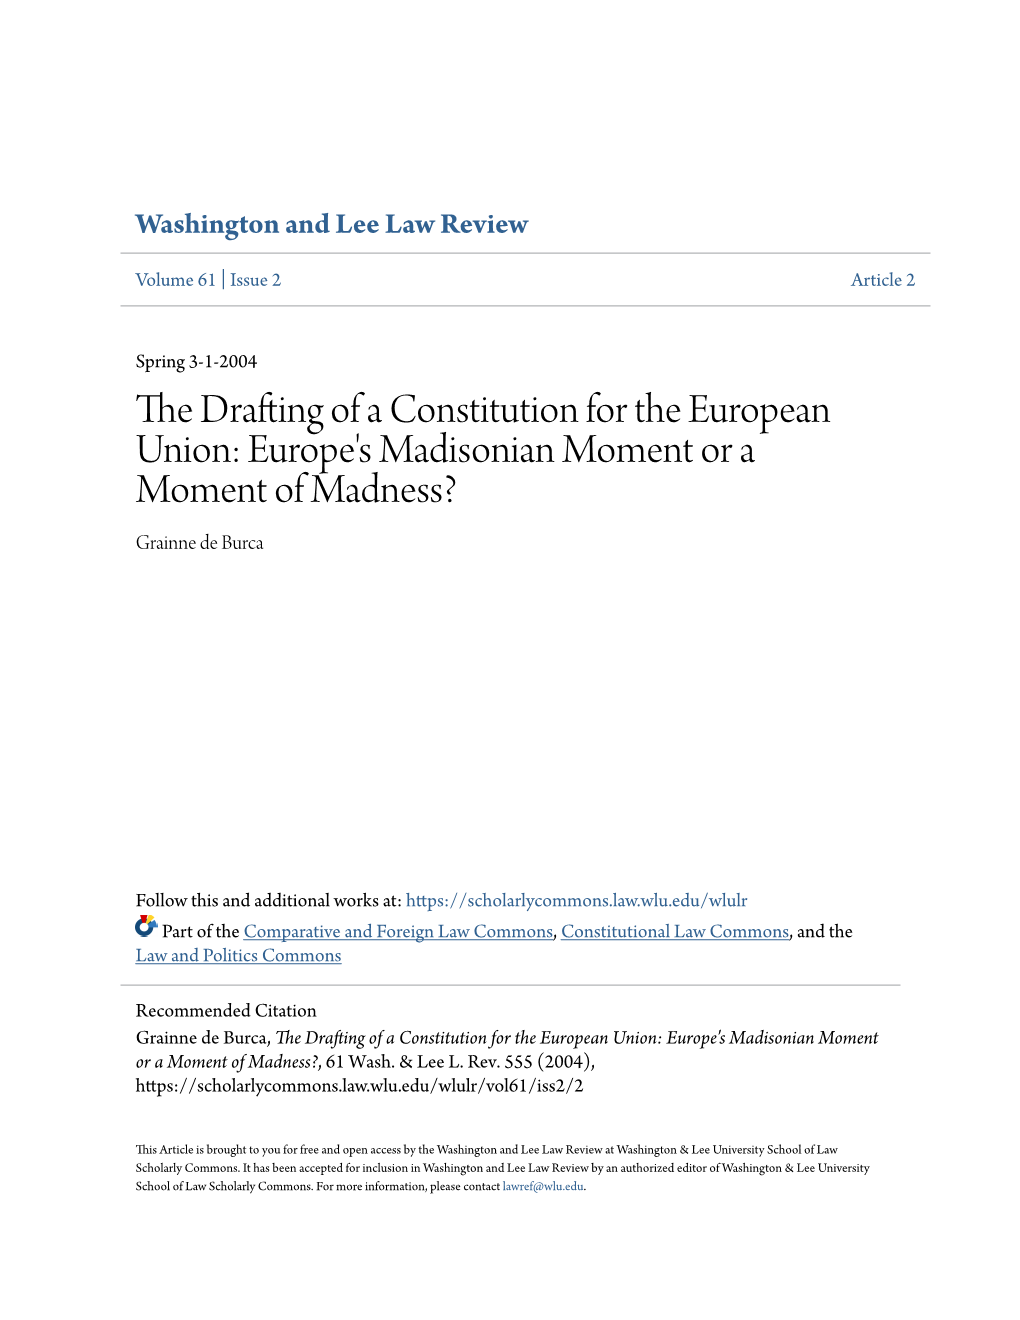 The Drafting of a Constitution for the European Union: Europe's Madisonian Moment Or a Moment of Madness? Grainne De Burca